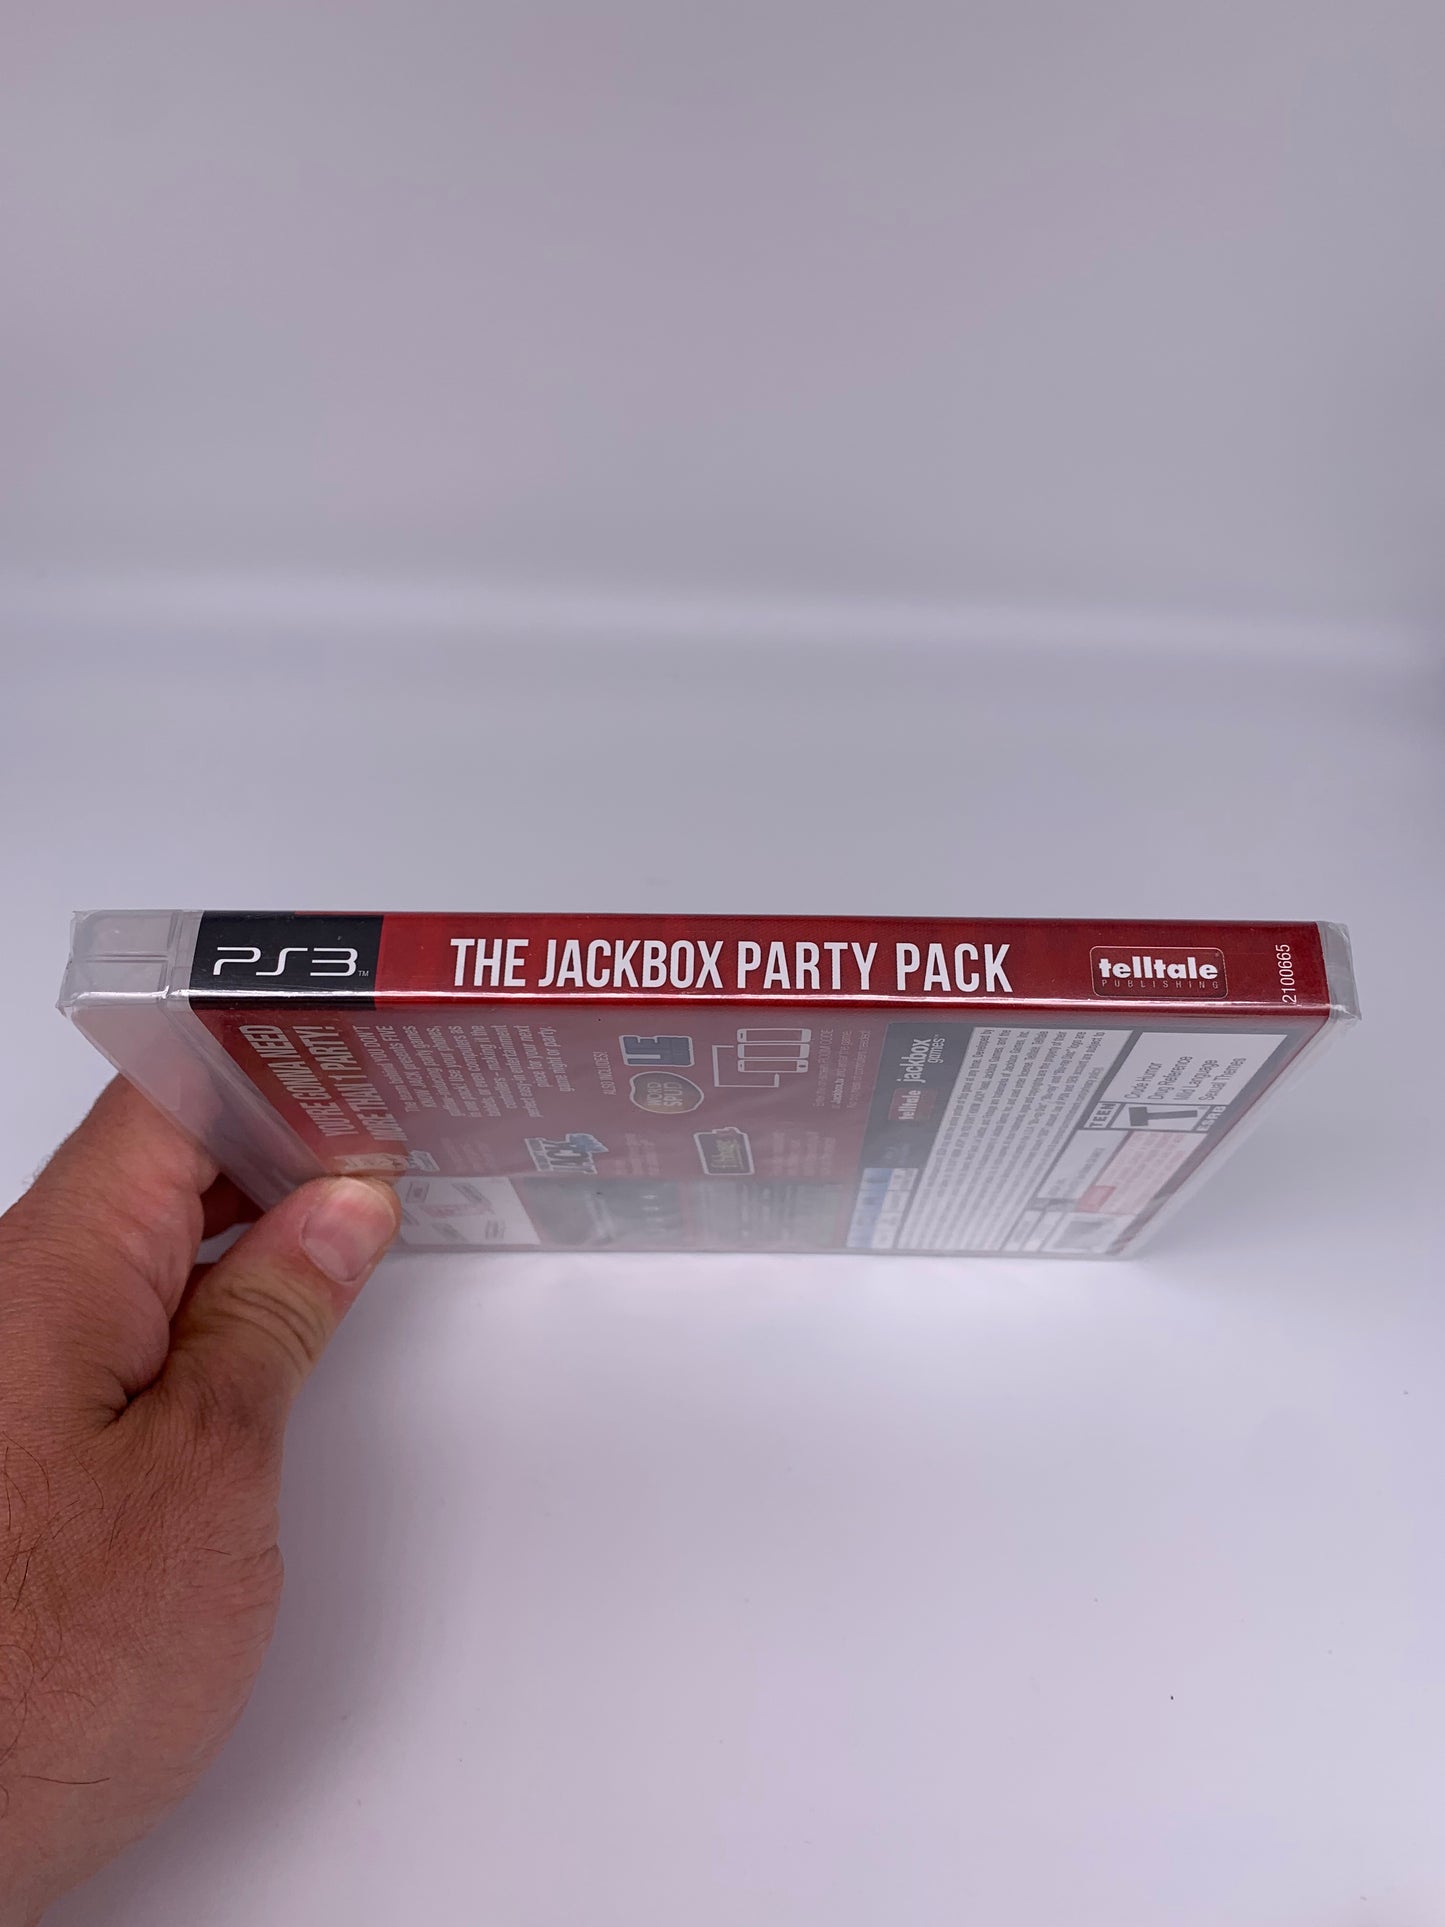 SONY PLAYSTATiON 3 [PS3] | THE JACKBOX PARTY PACK